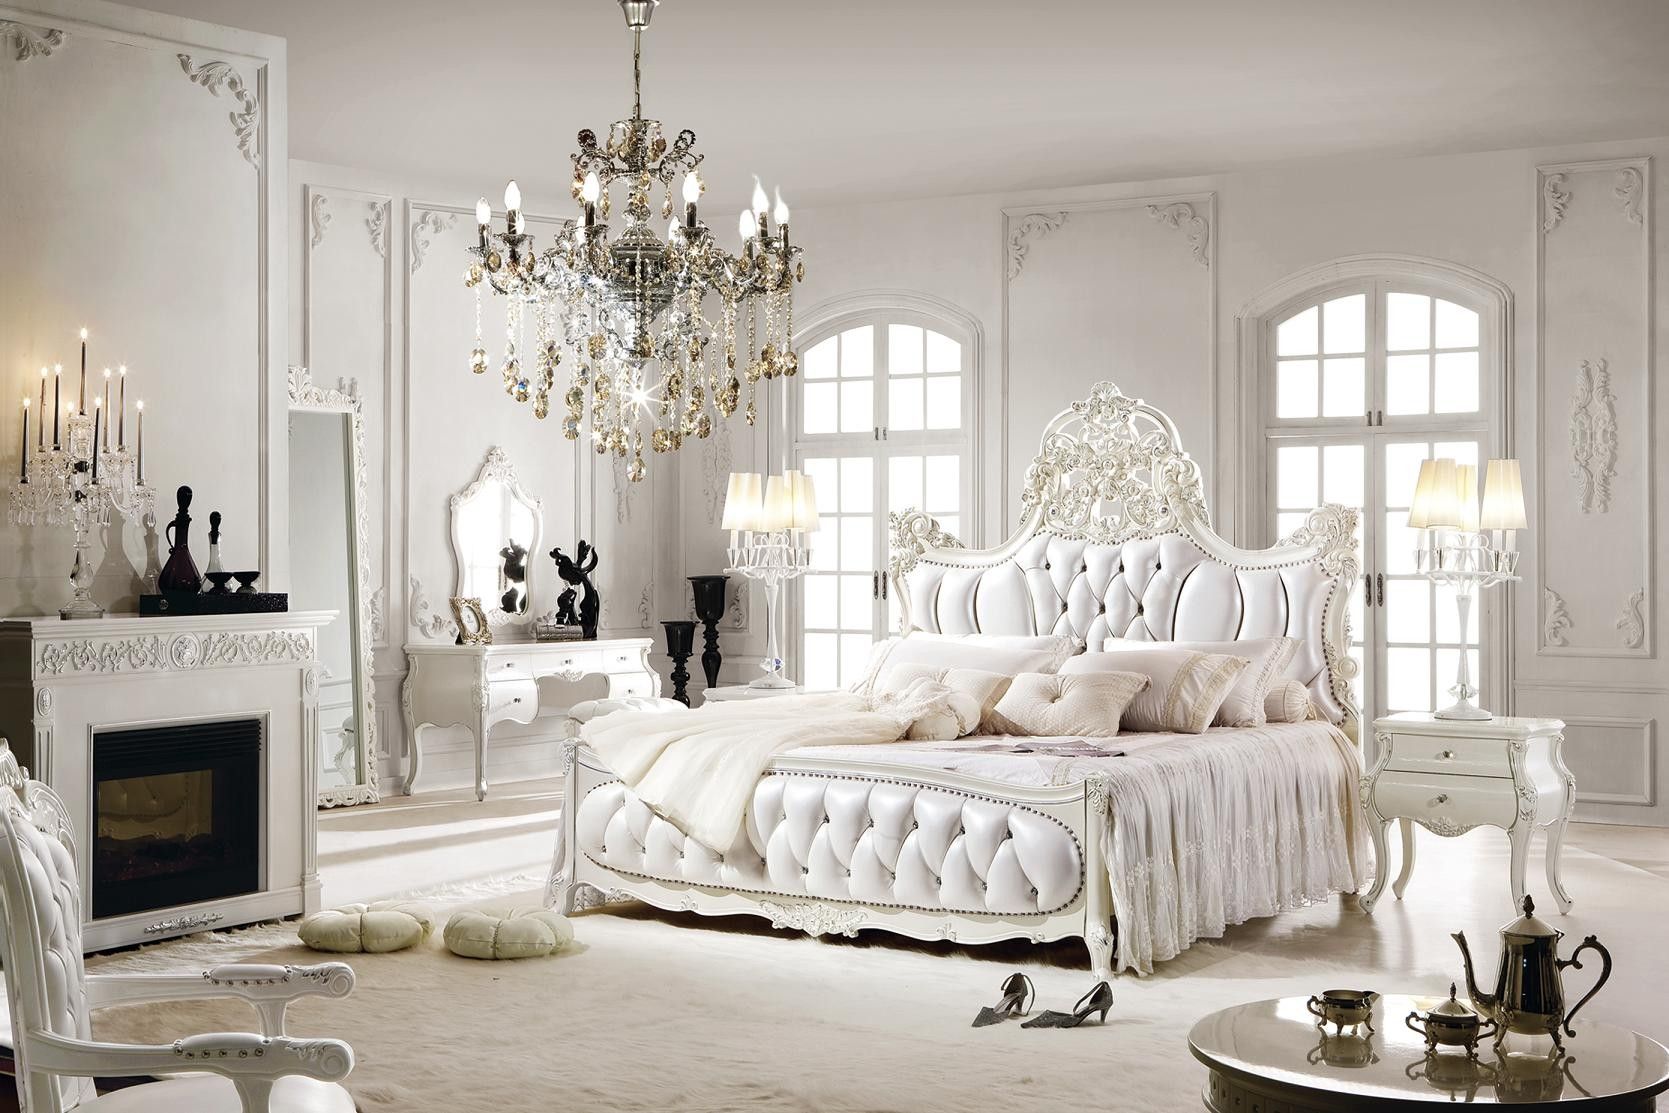  french provincial bedroom ideas